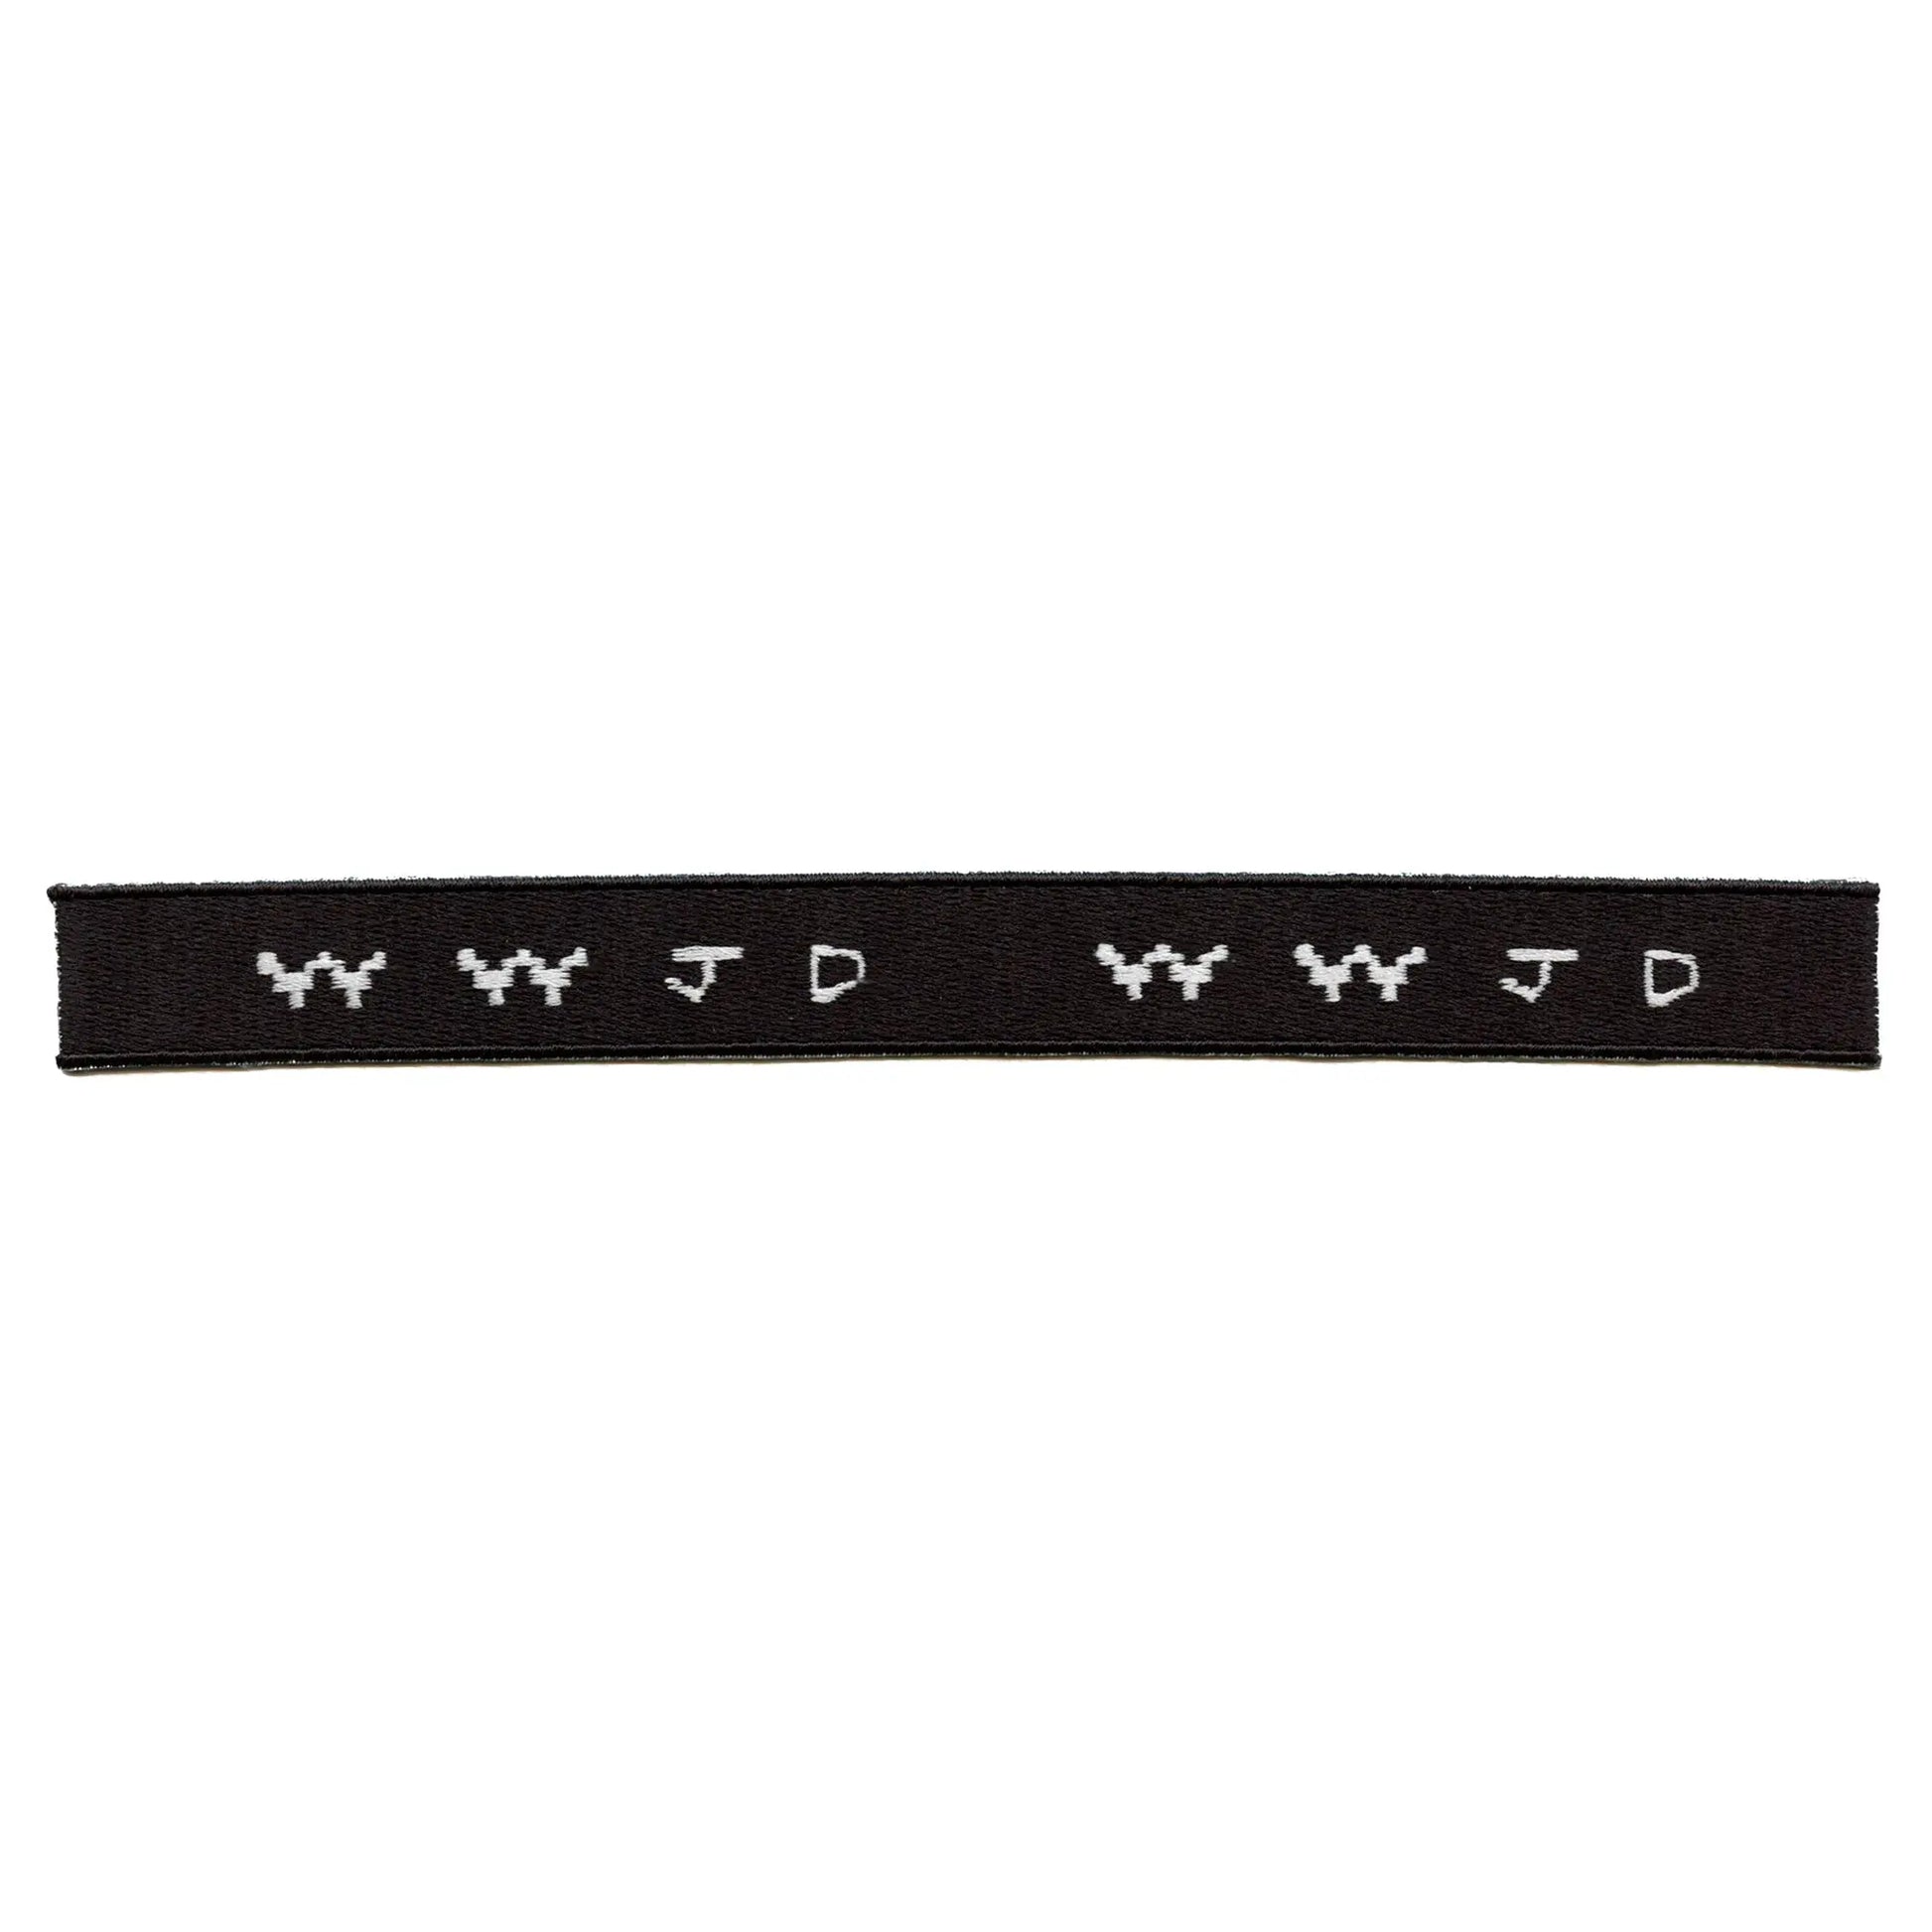 What Would Jesus Do Patch Strip Religion Crist Embroidered Iron-On